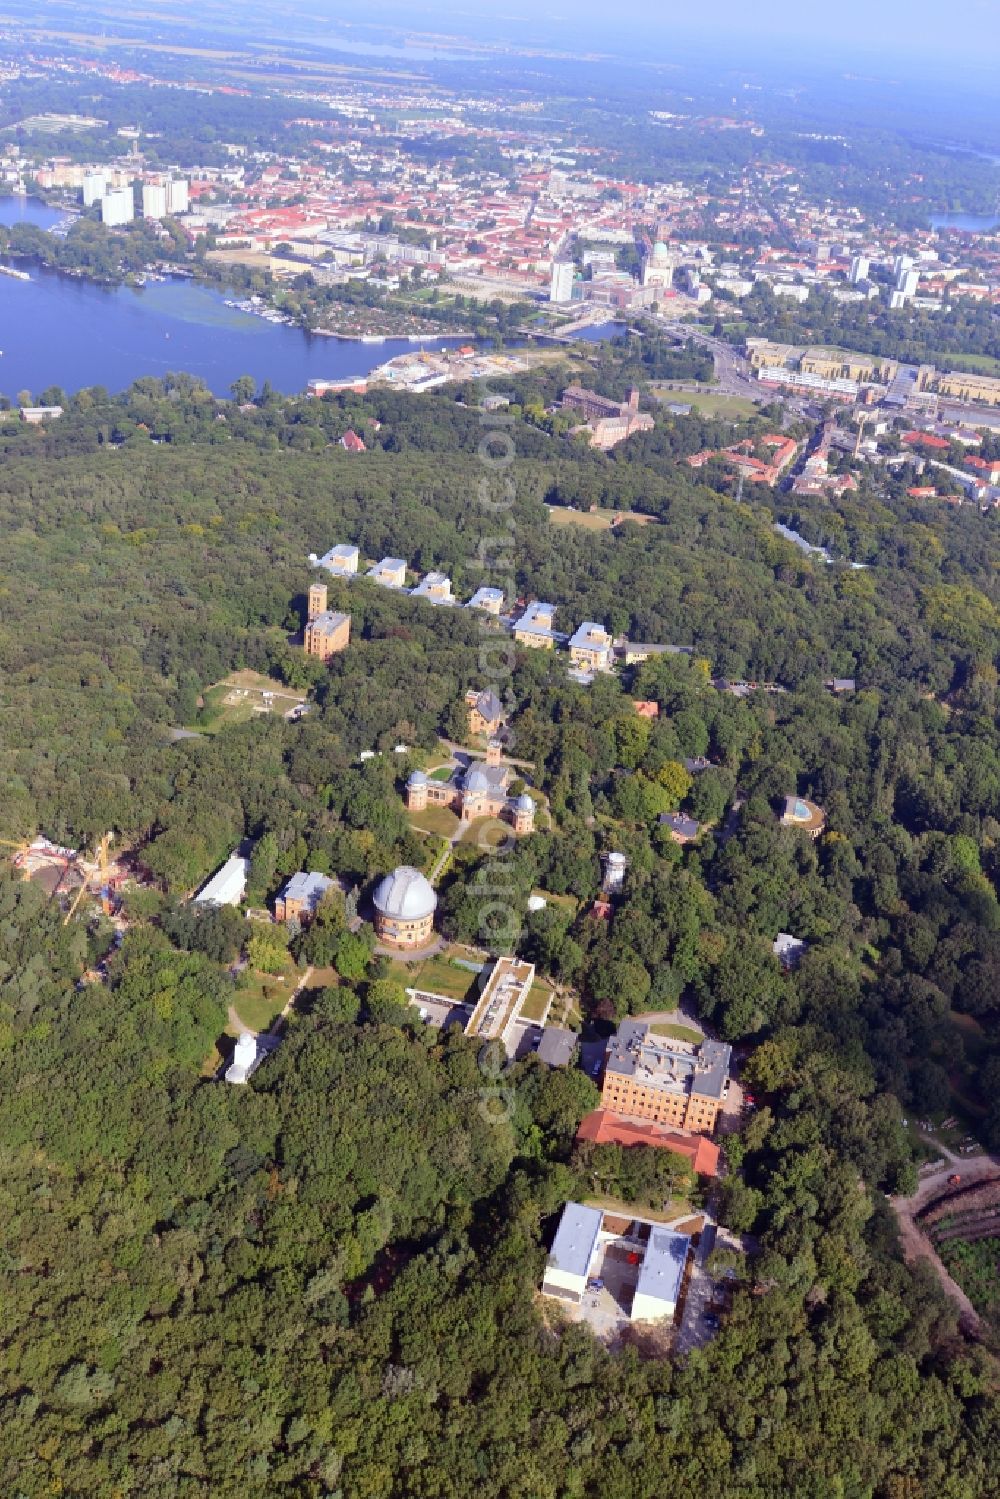 Potsdam from the bird's eye view: View of the science park Albert Einstein on the Telegrafenberg in Potsdam in the federal state of Brandenburg